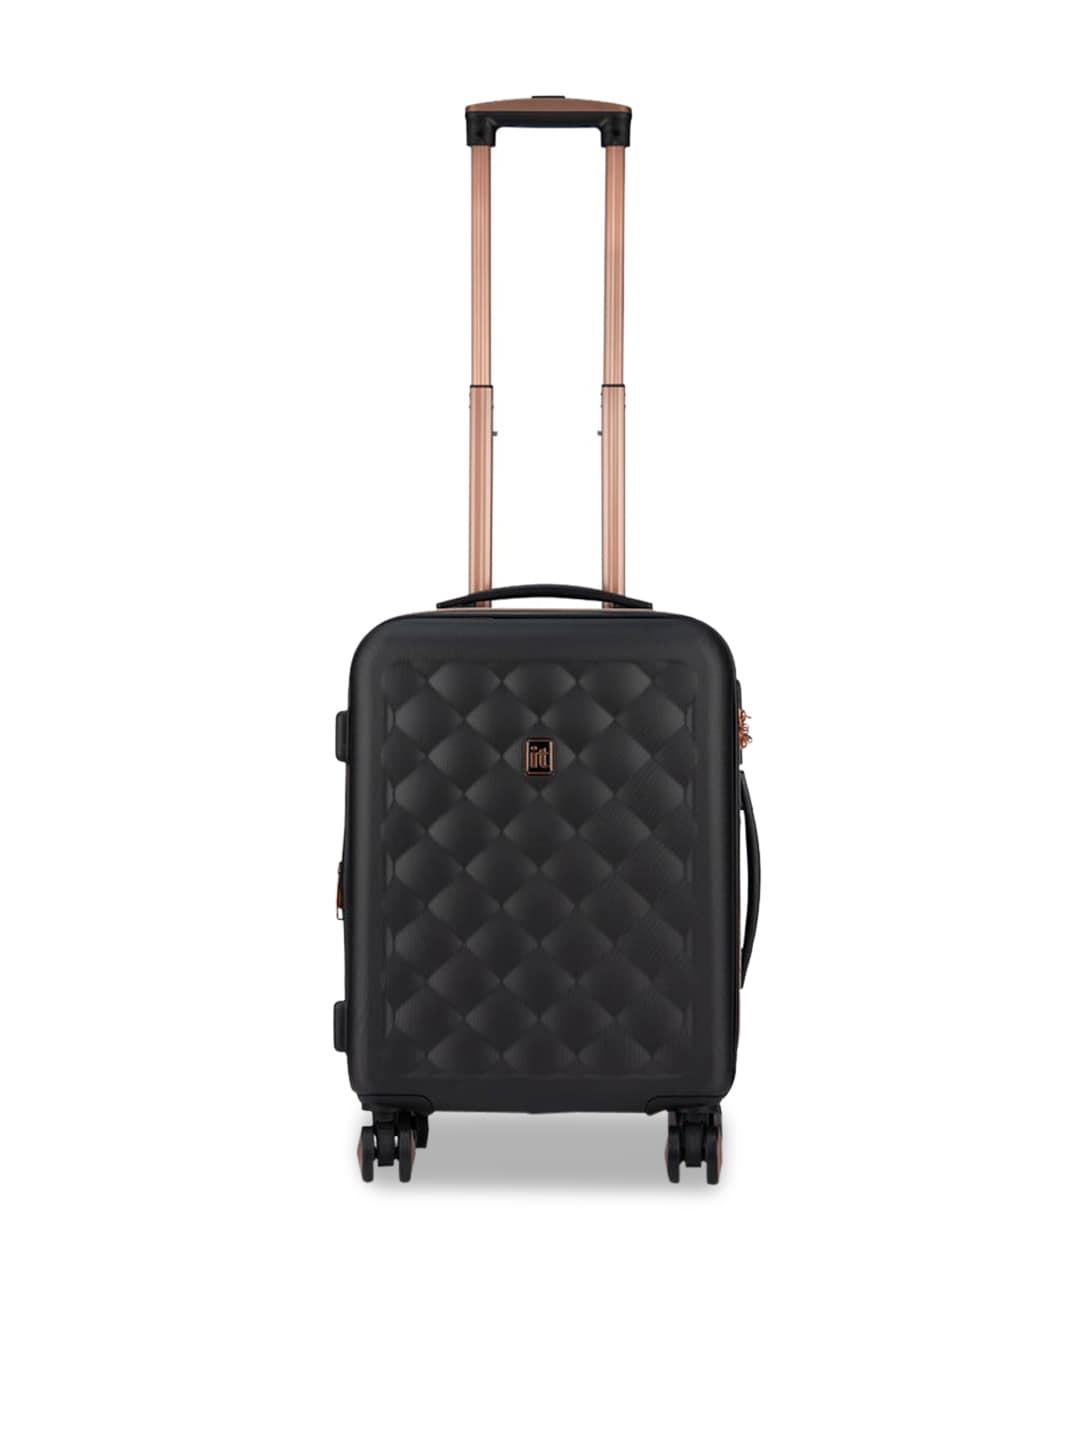 it luggage black textured hard-sided cabin trolley suitcases